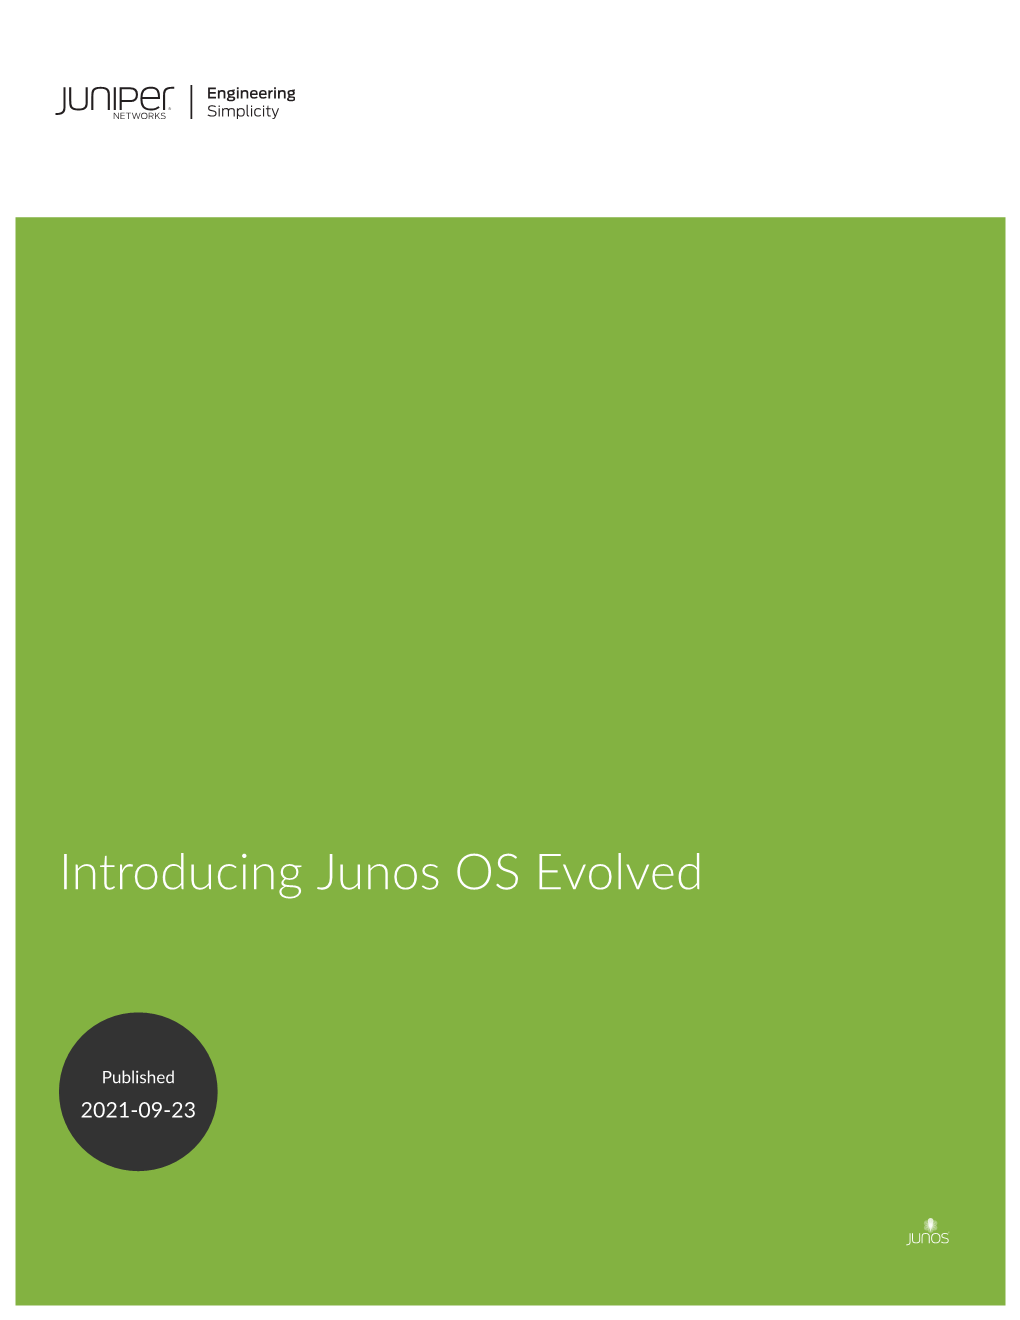 Introducing Junos OS Evolved